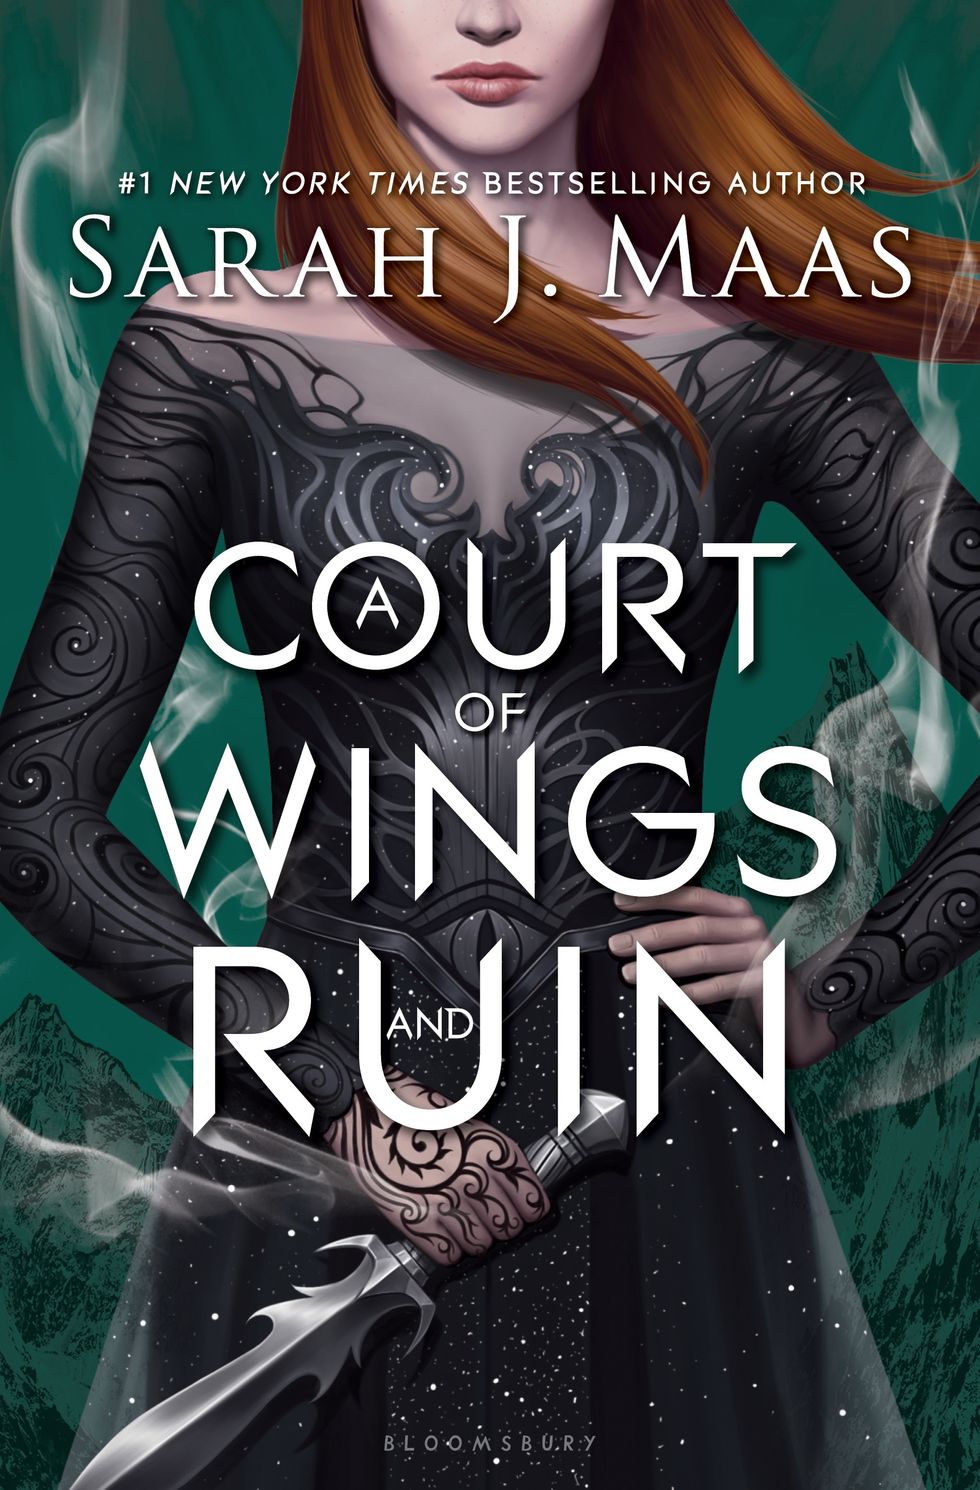 Book Review: A Court of Wings and Ruin by Sarah J. Maas